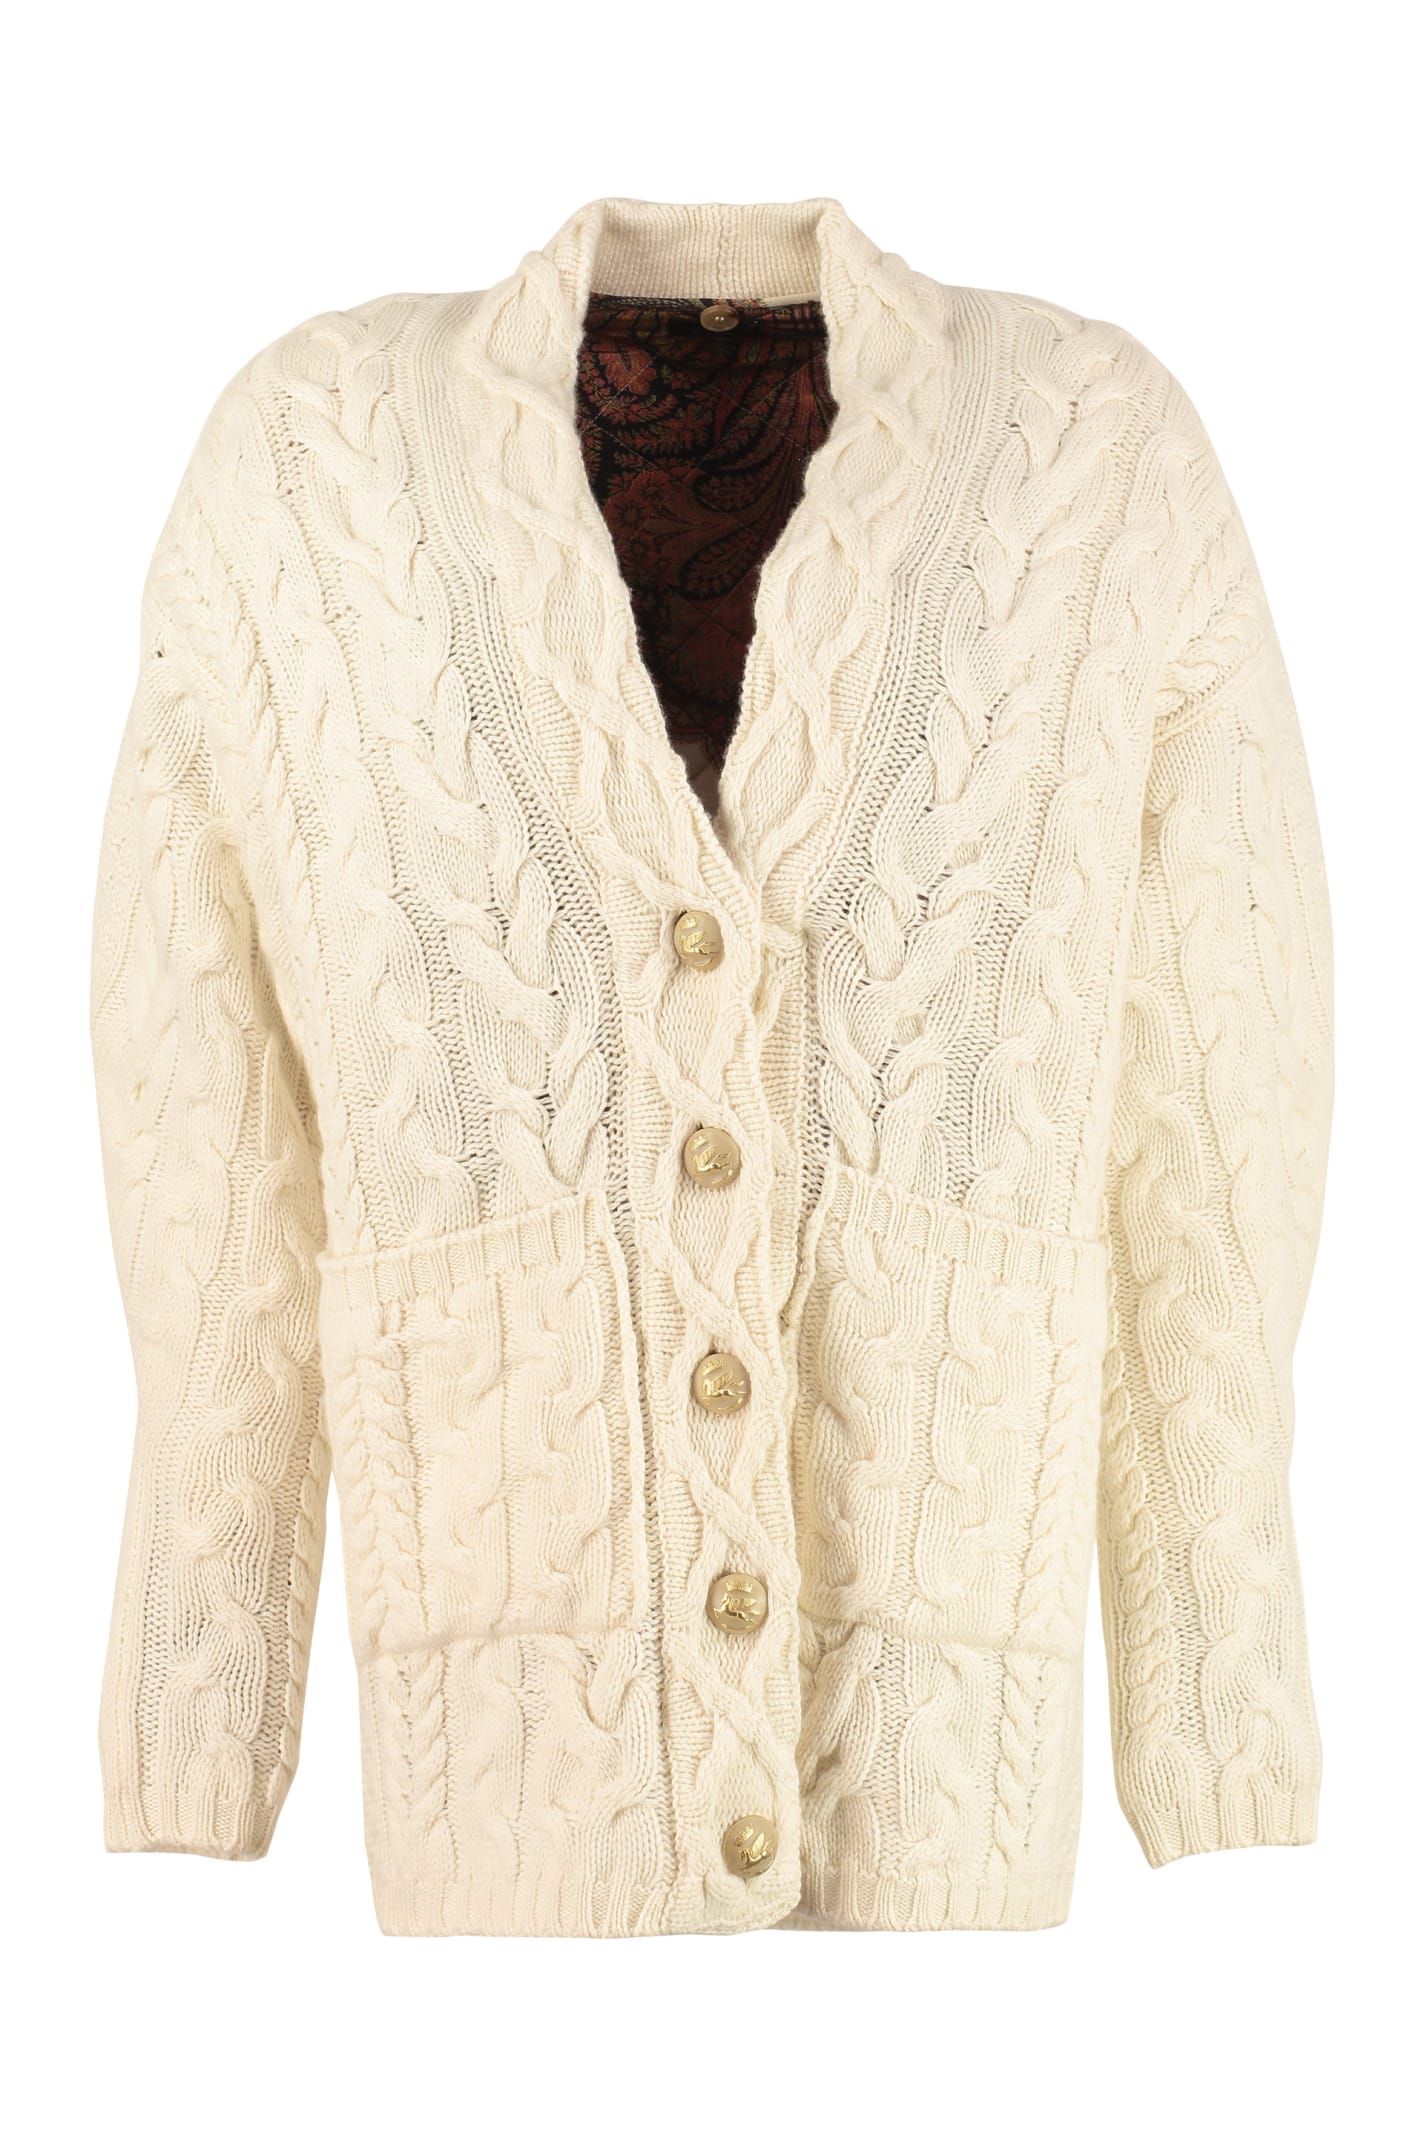 Etro Wool And Cashmere Cardigan